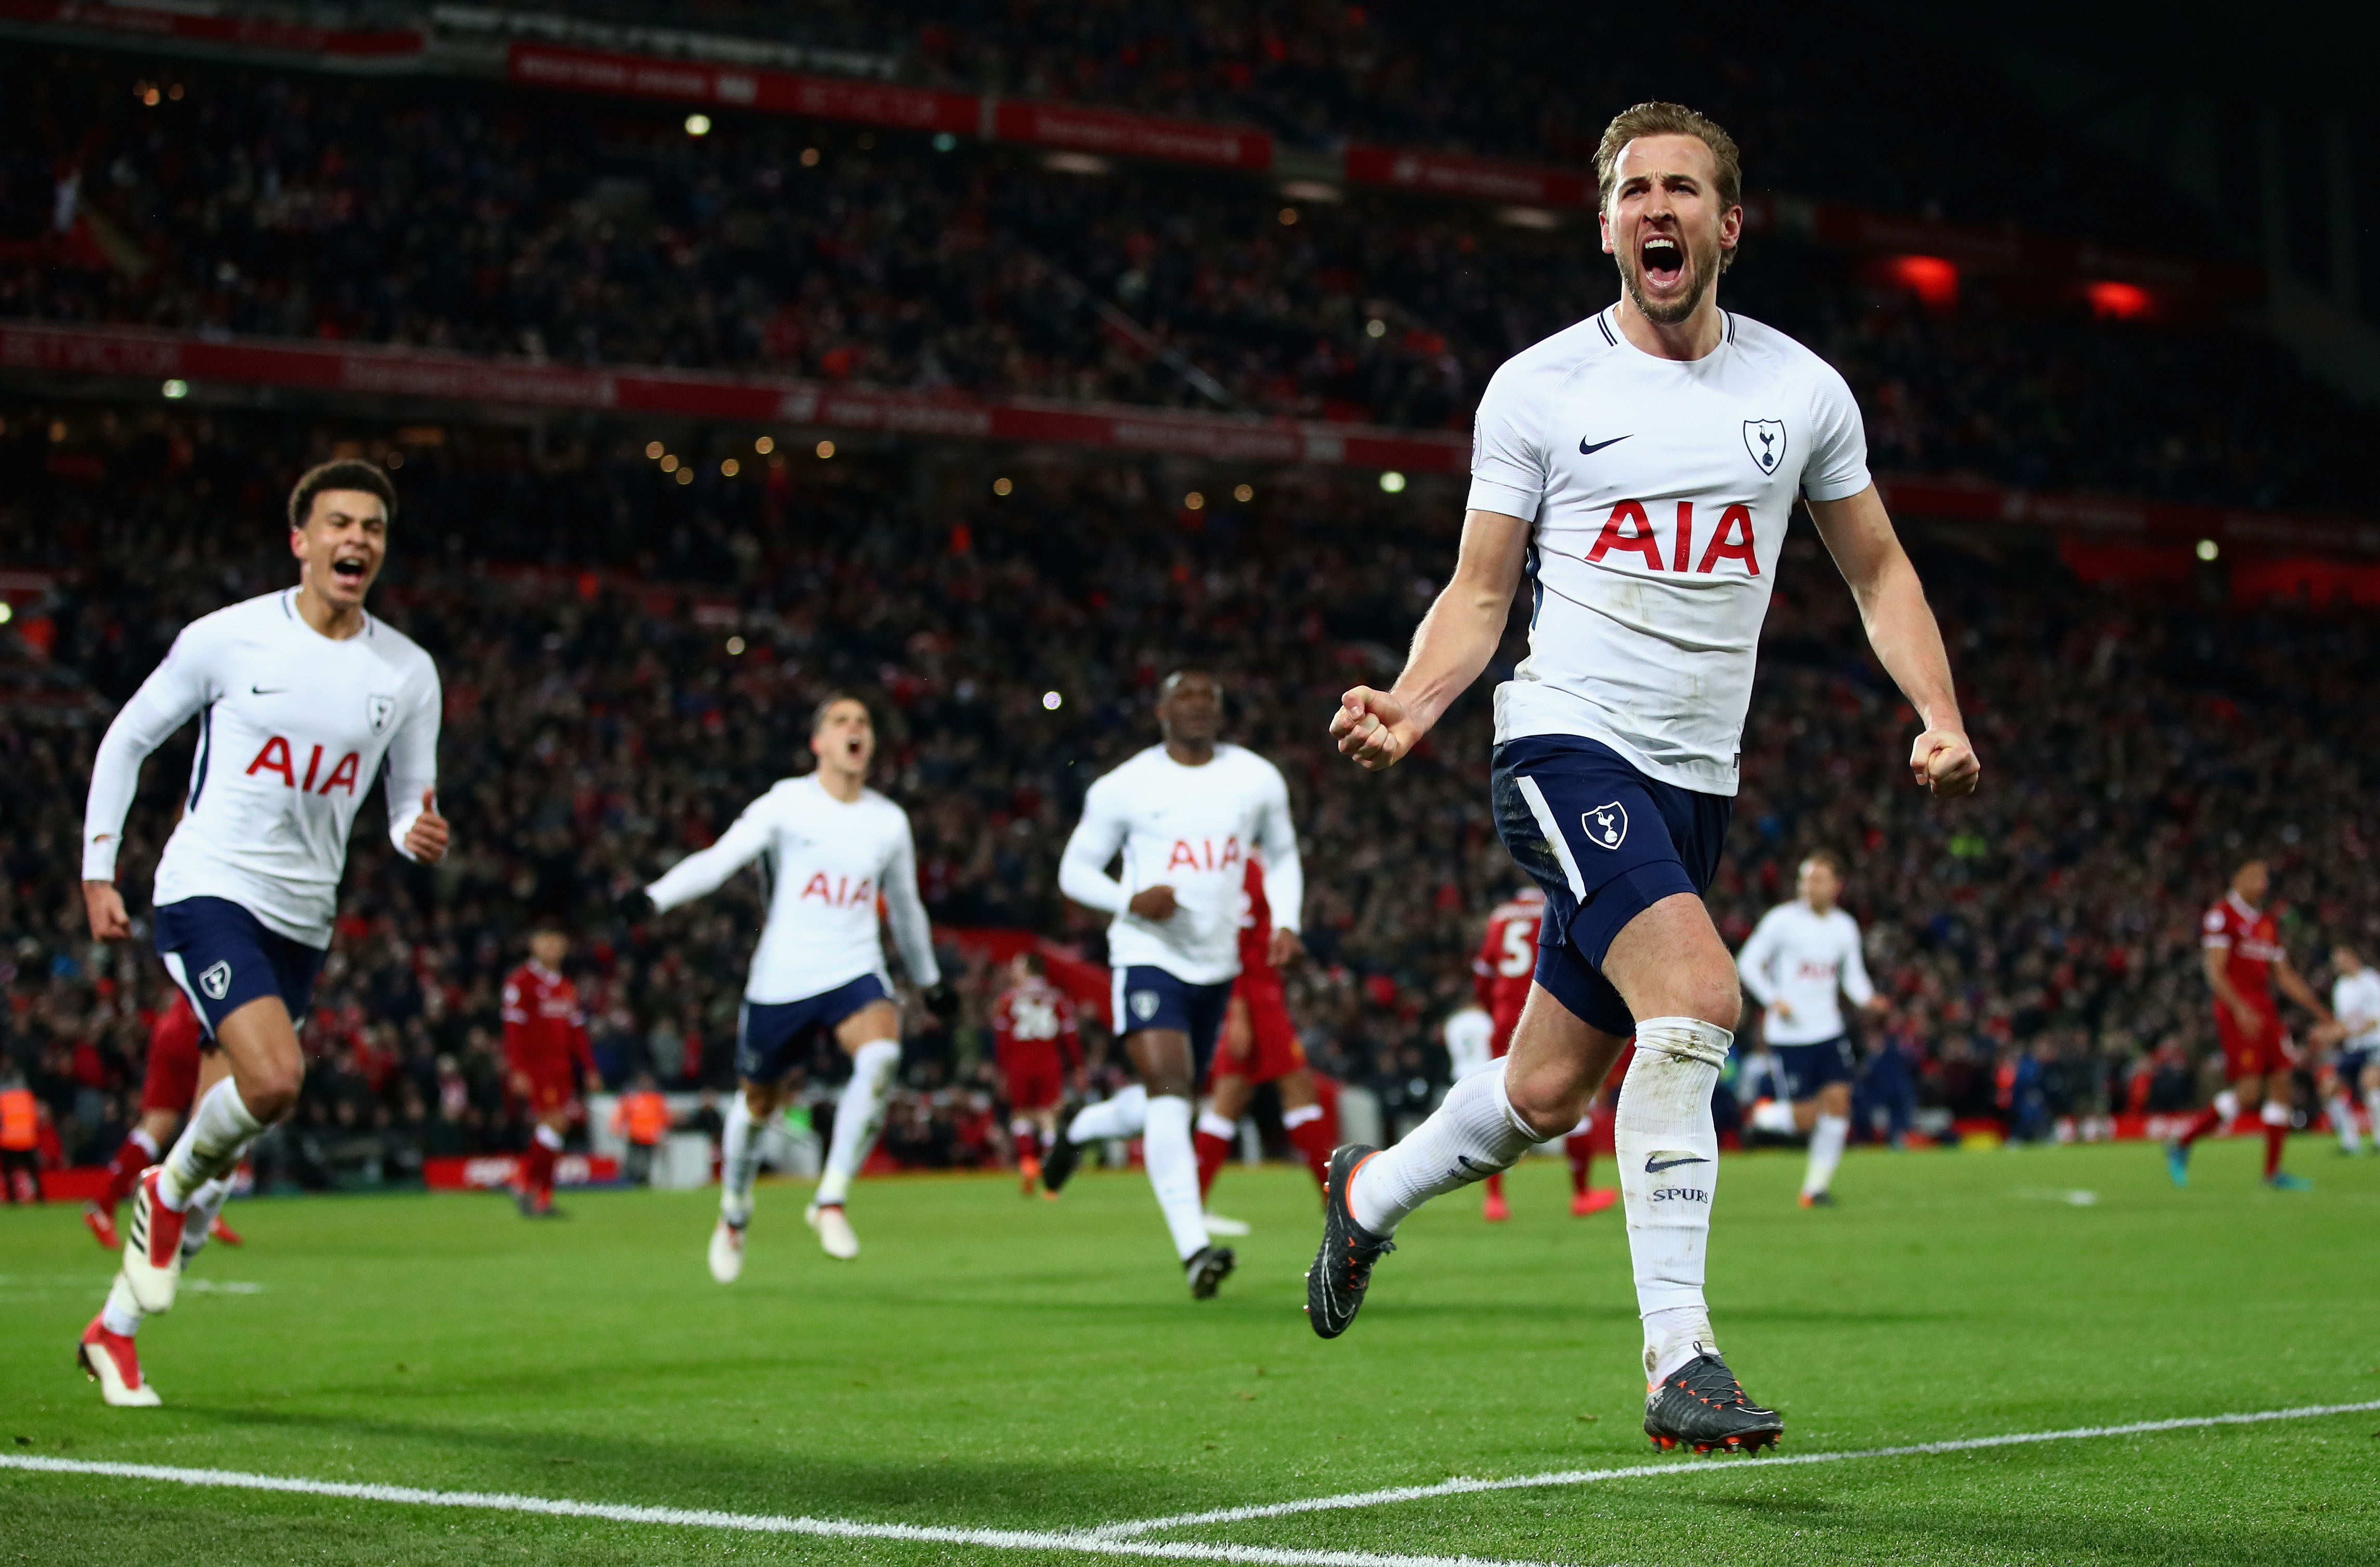 Football Round Up | Southampton play out draw against Tottenham Hotspur; Barcelona thrash Real Betis 5-0